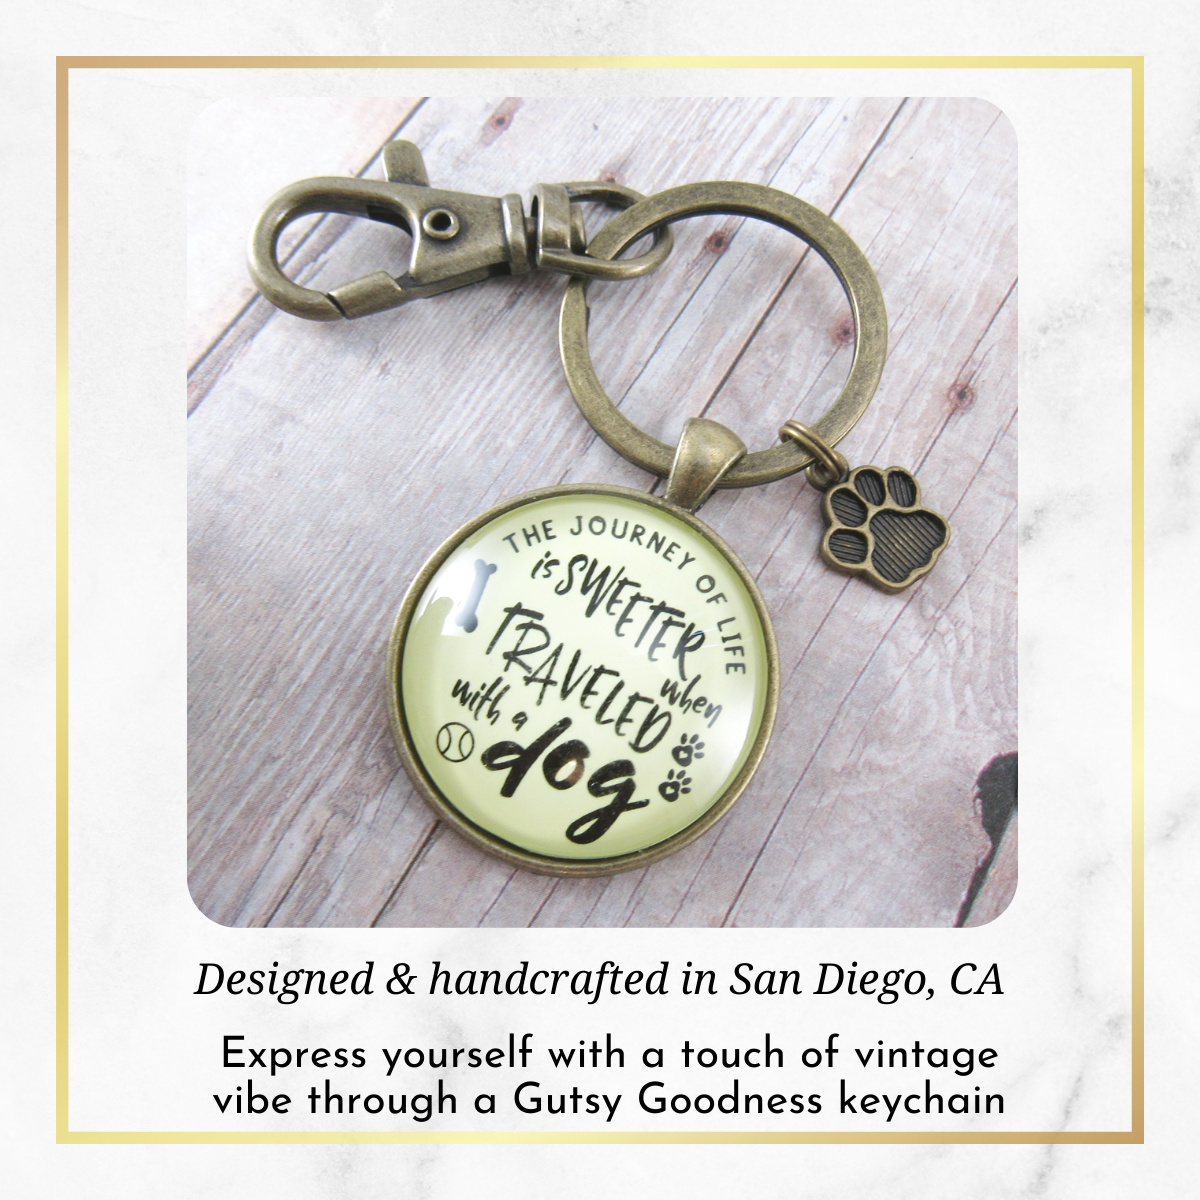 Dog Keychain Life Is Sweeter BFF Friendship Pet Jewelry For Men Rustic Dad Paw - Gutsy Goodness Handmade Jewelry;Dog Keychain Life Is Sweeter Bff Friendship Pet Jewelry For Men Rustic Dad Paw - Gutsy Goodness Handmade Jewelry Gifts